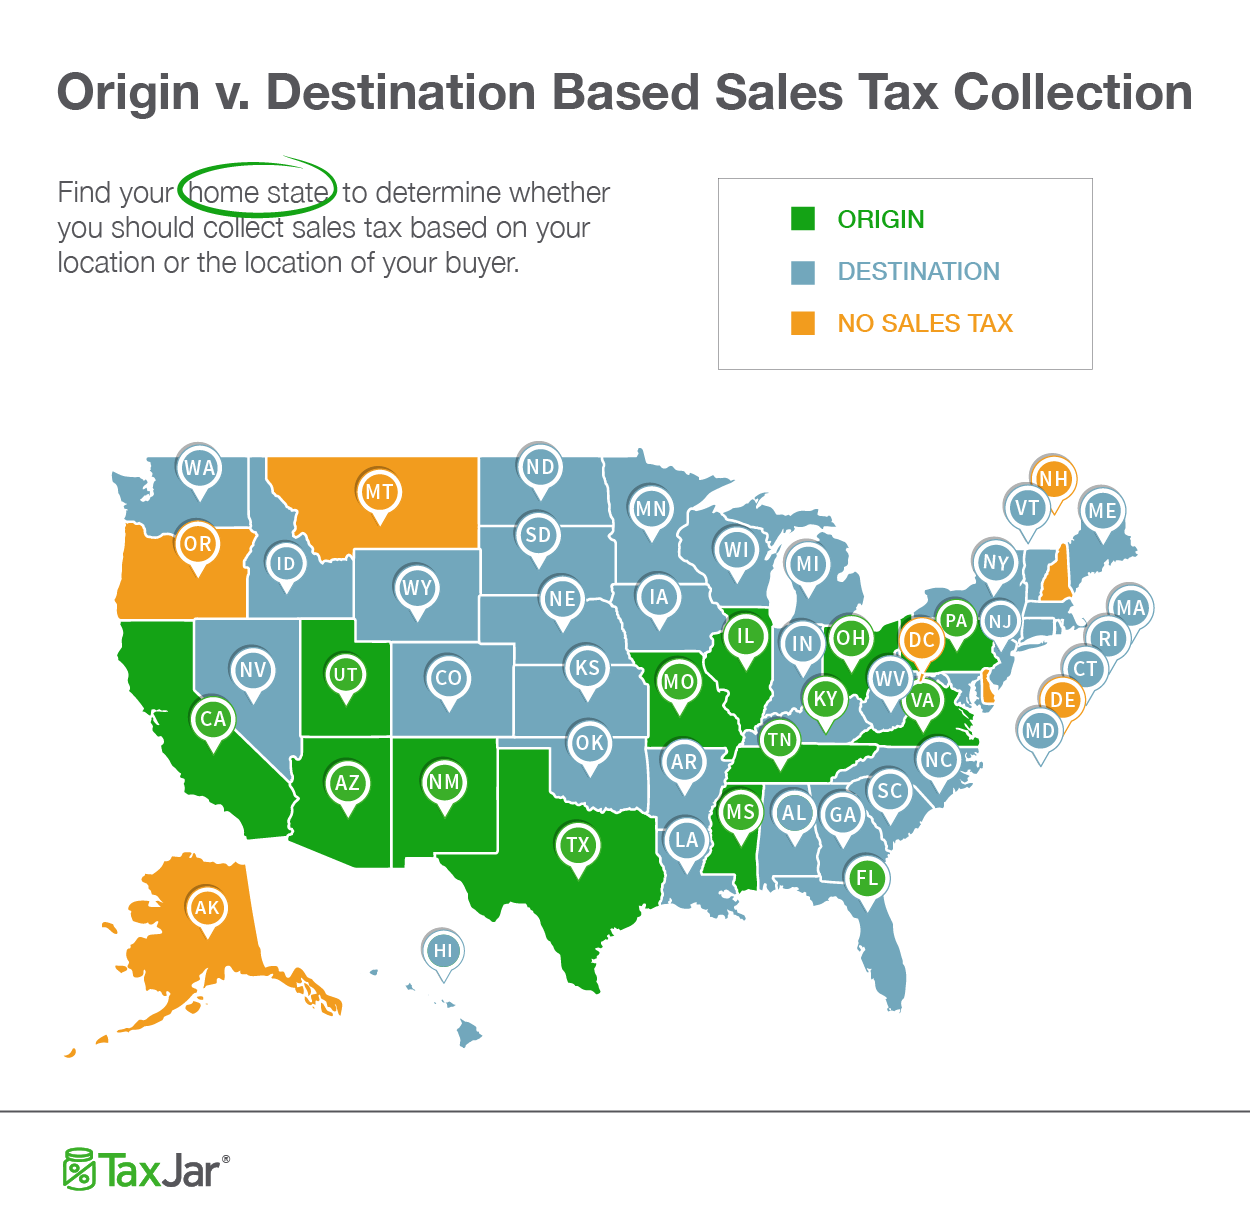 Origin-based and Destination-based Sales Tax Collection 101